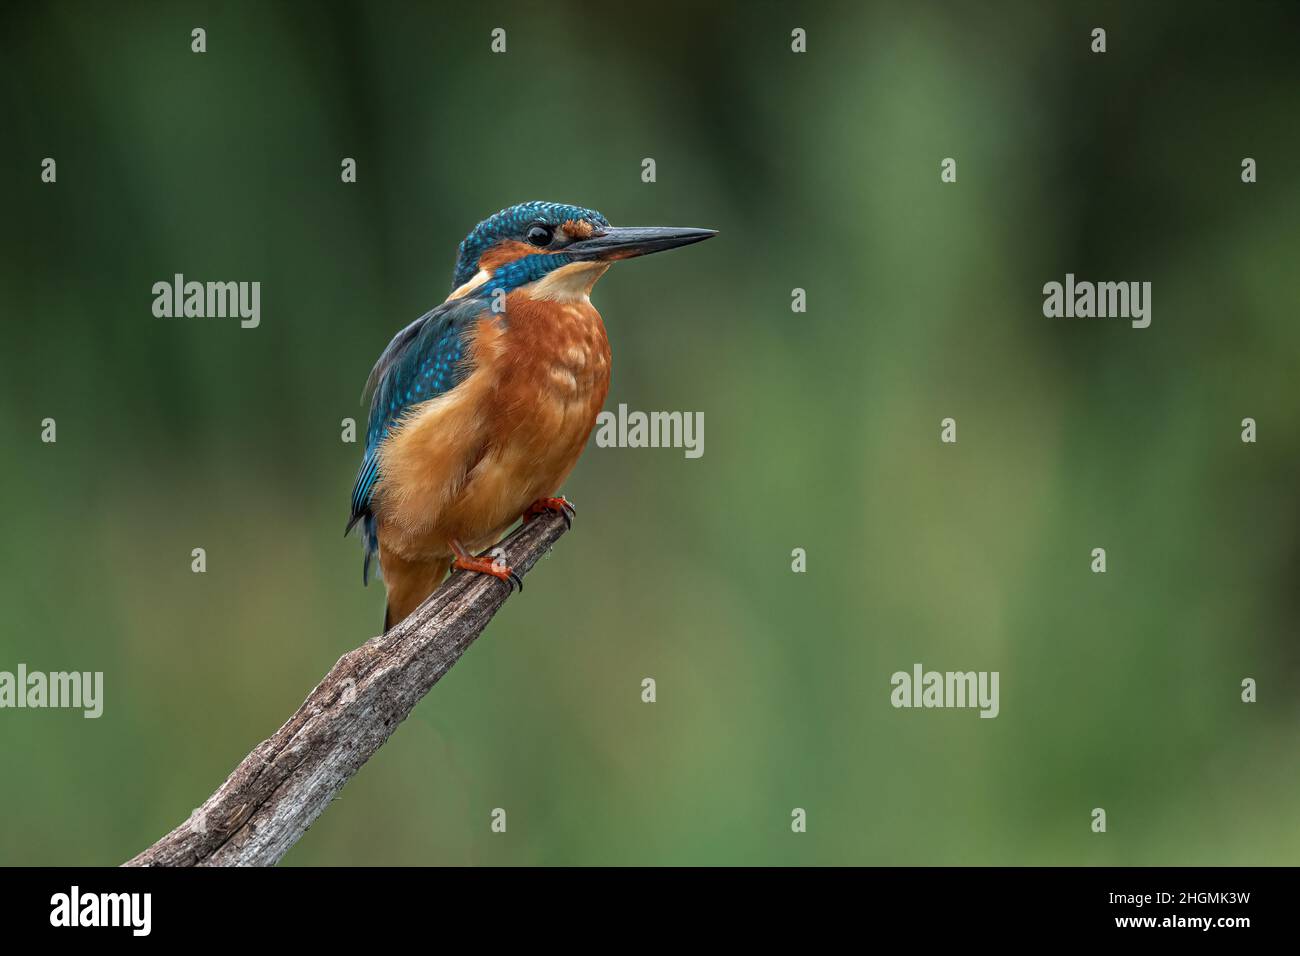 A portrait of a kingfisher perched on a wooden branch with a plain out of focus background Stock Photo